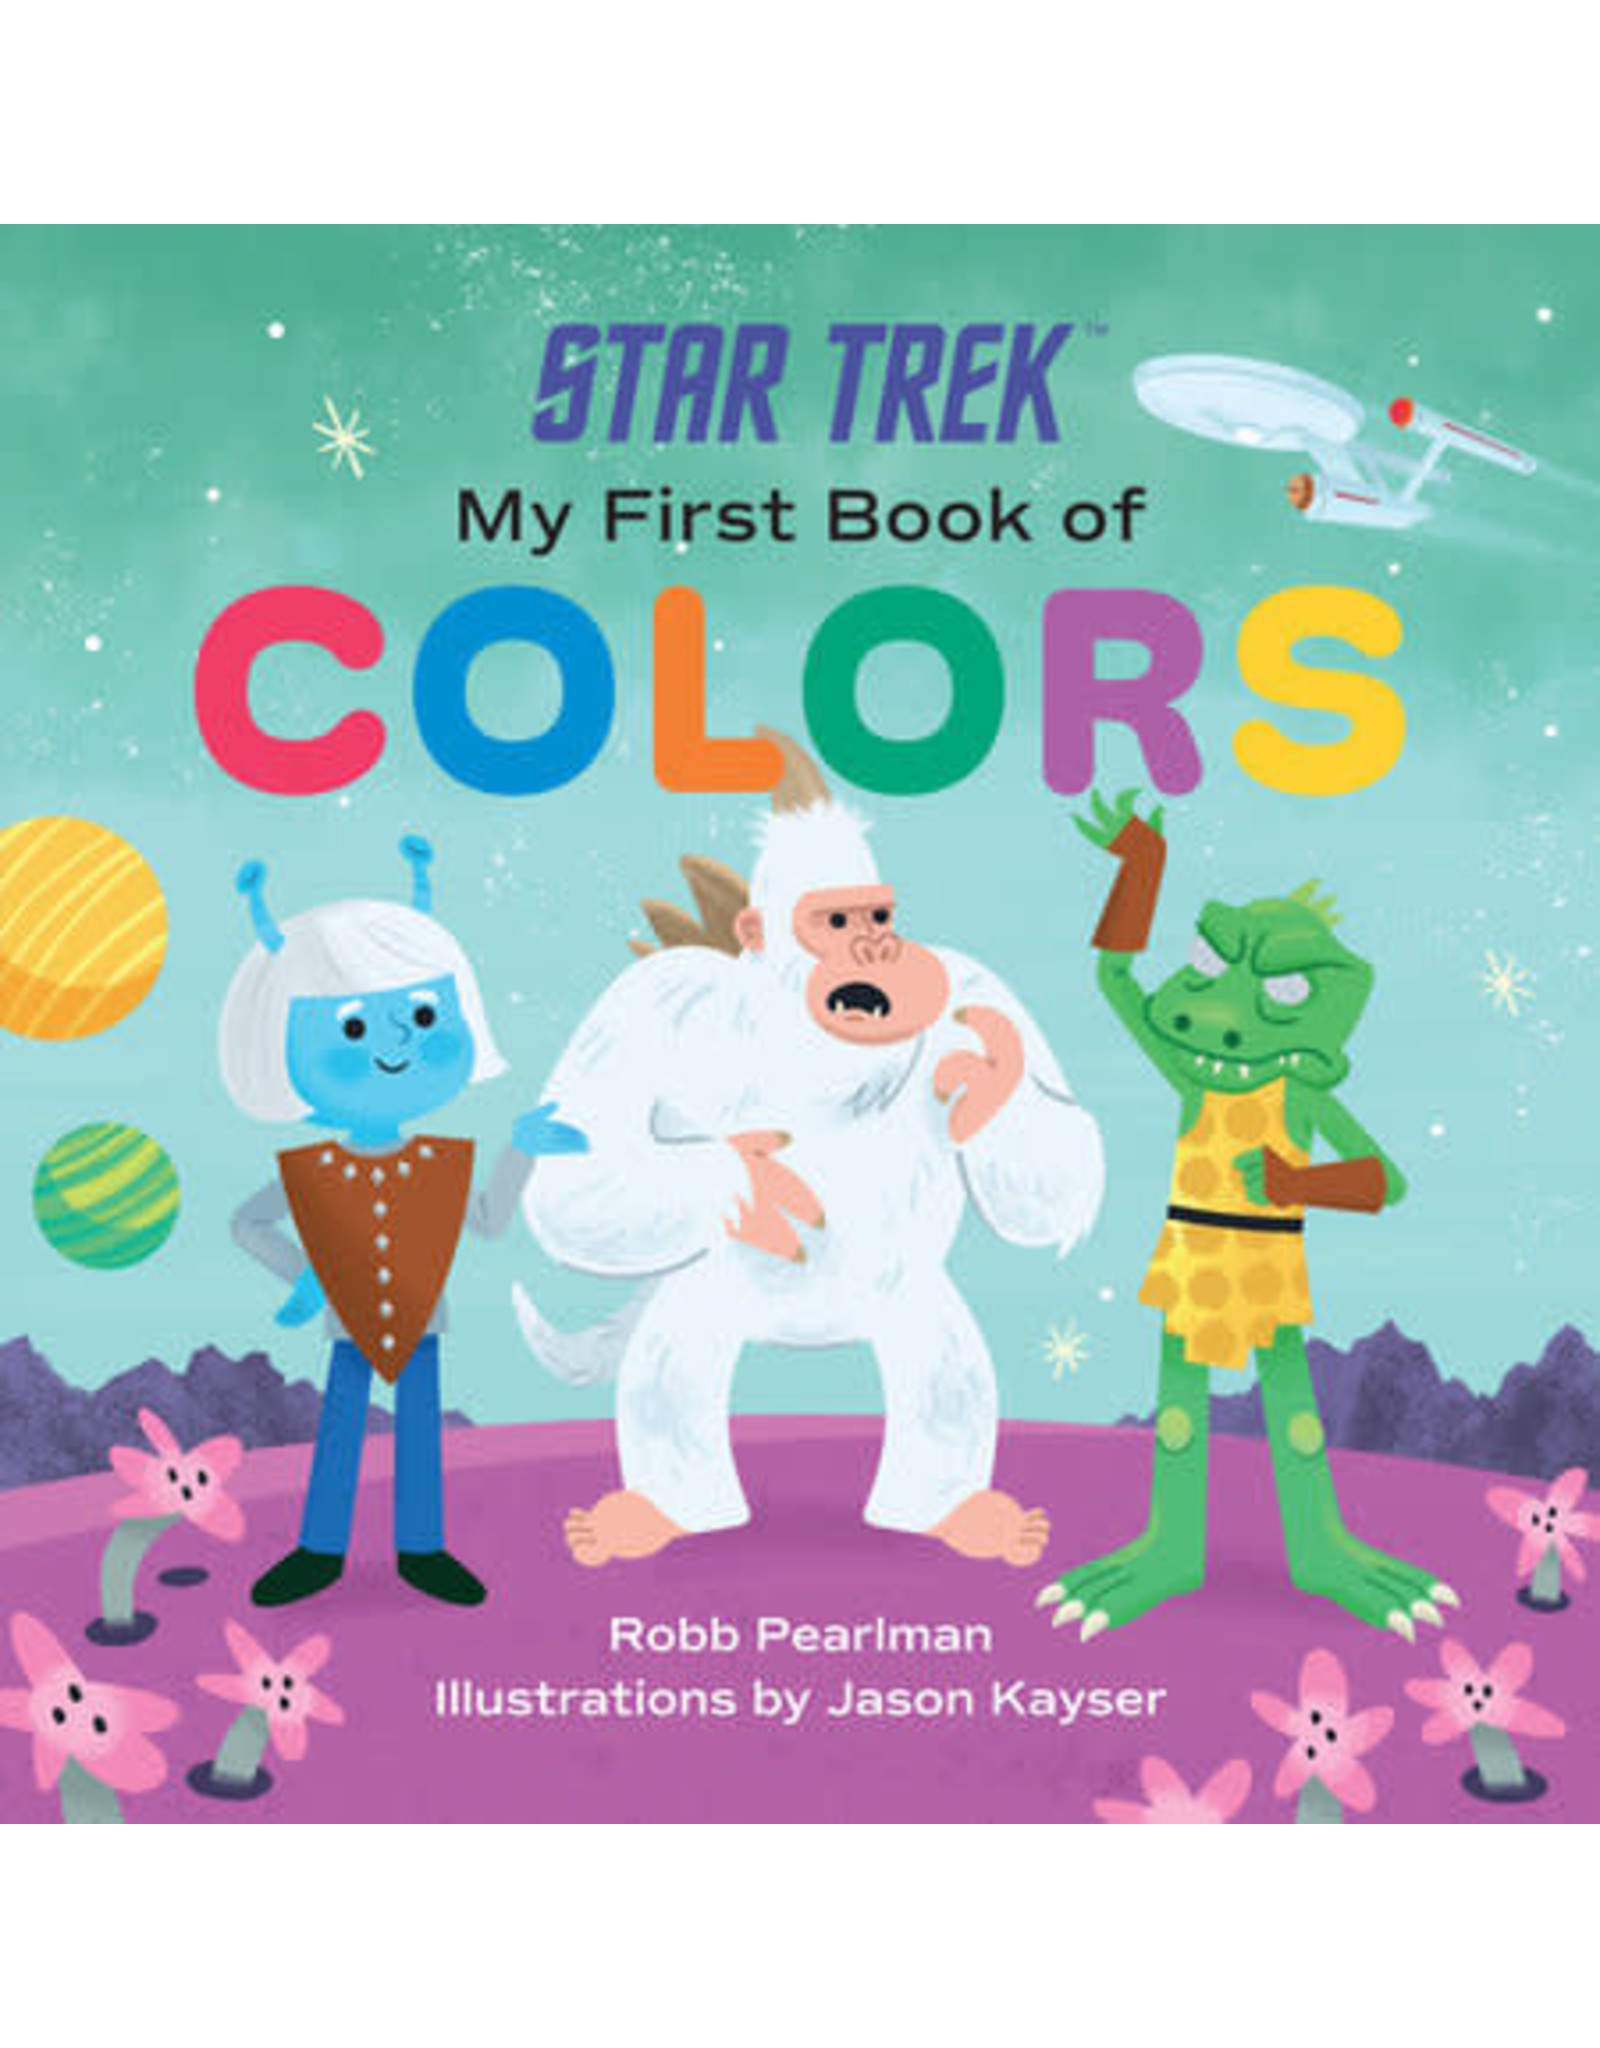 Star Trek: My First Book of Colors